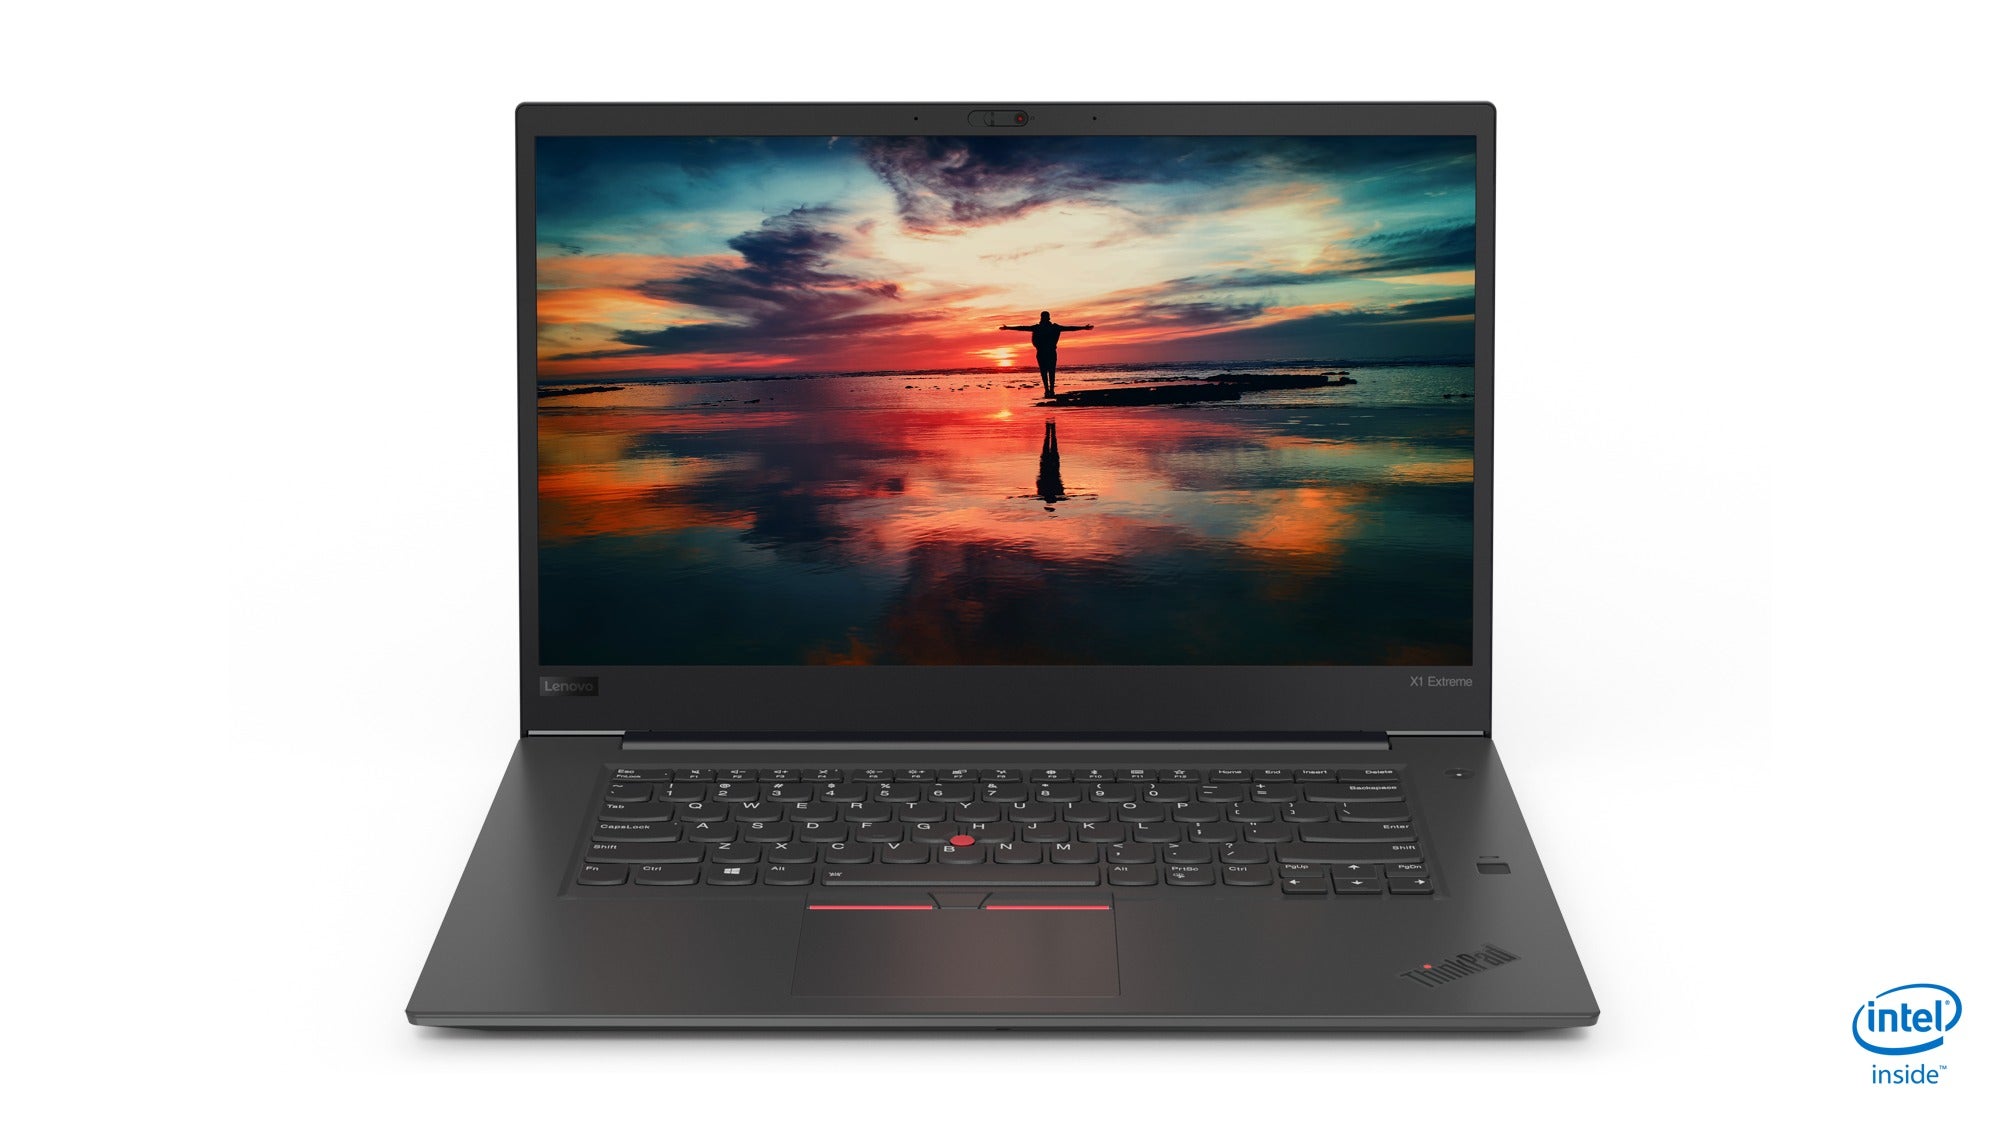 Why did Lenovo stretch the ThinkPad X1 Extreme to 15 inches? To kill the MacBook Pro